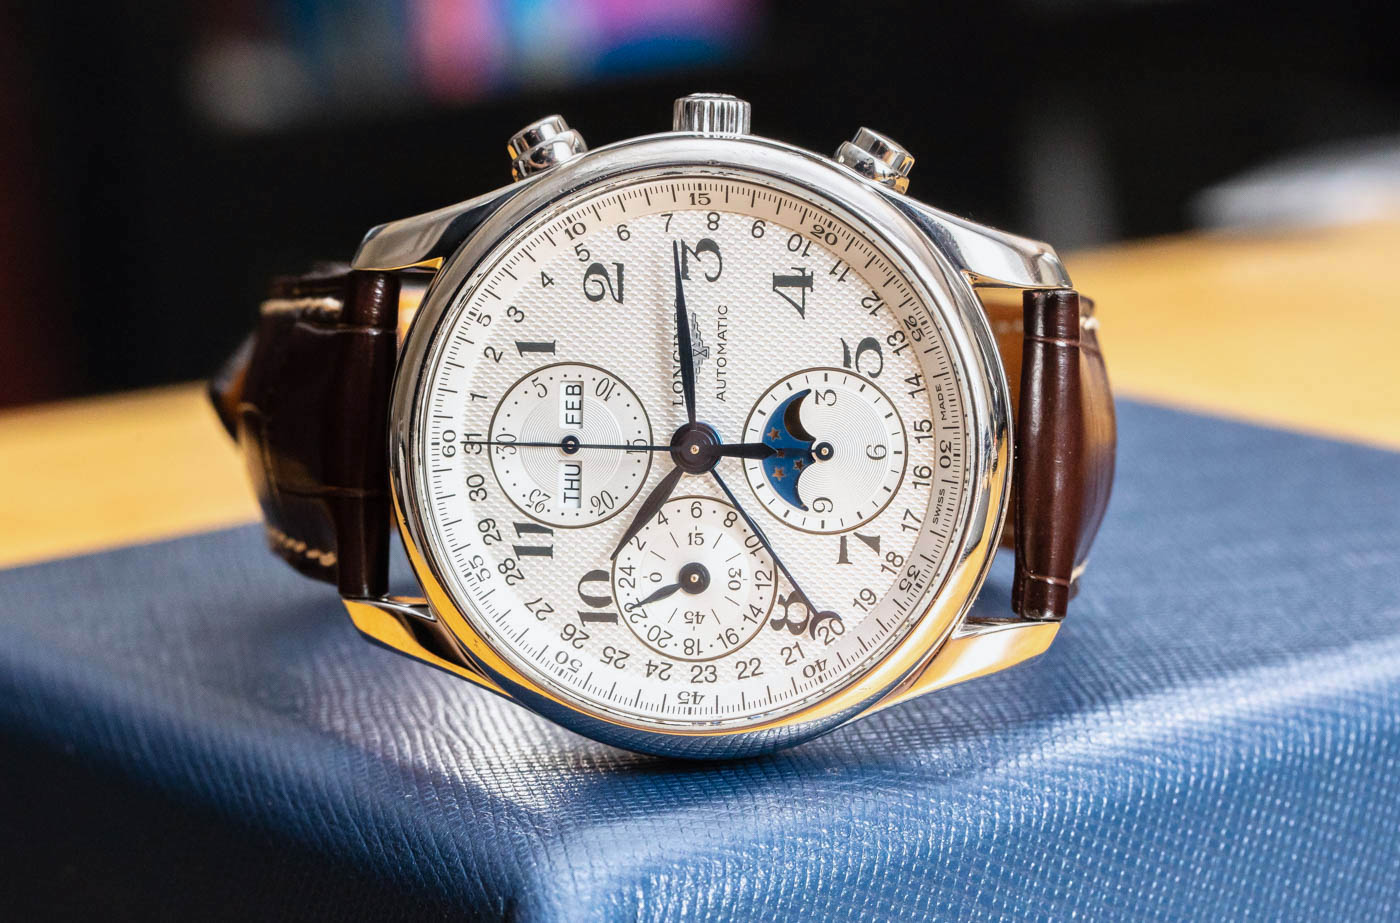 Longines Master Collection Moon Phase Chronograph L2.673.4.78.3 Watch